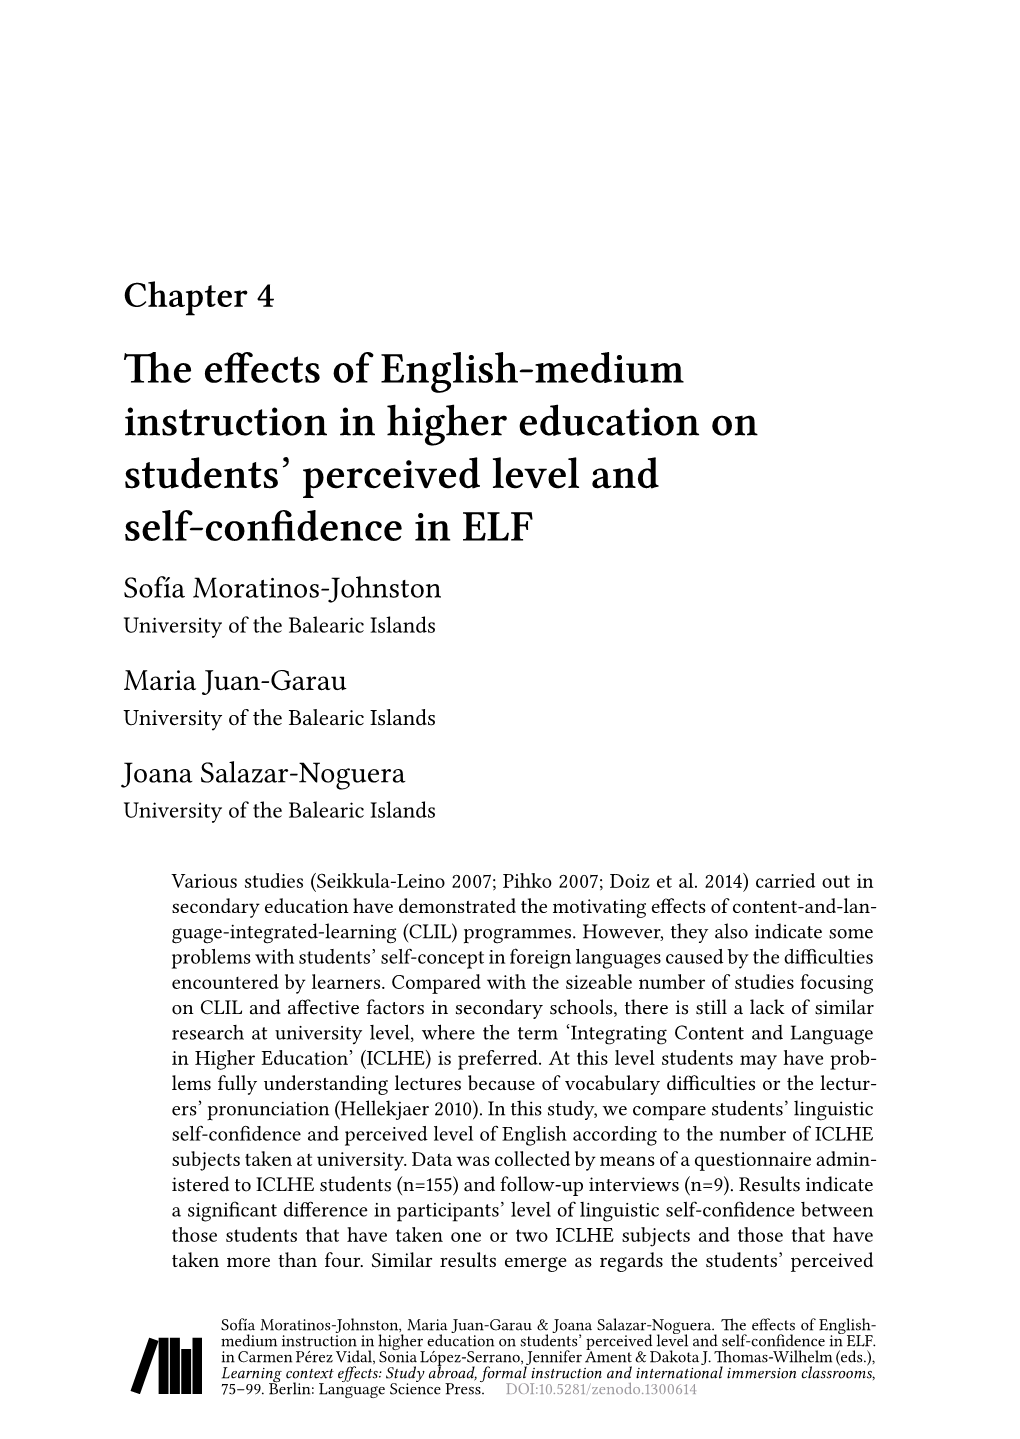 The Effects of English-Medium Instruction in Higher Education On